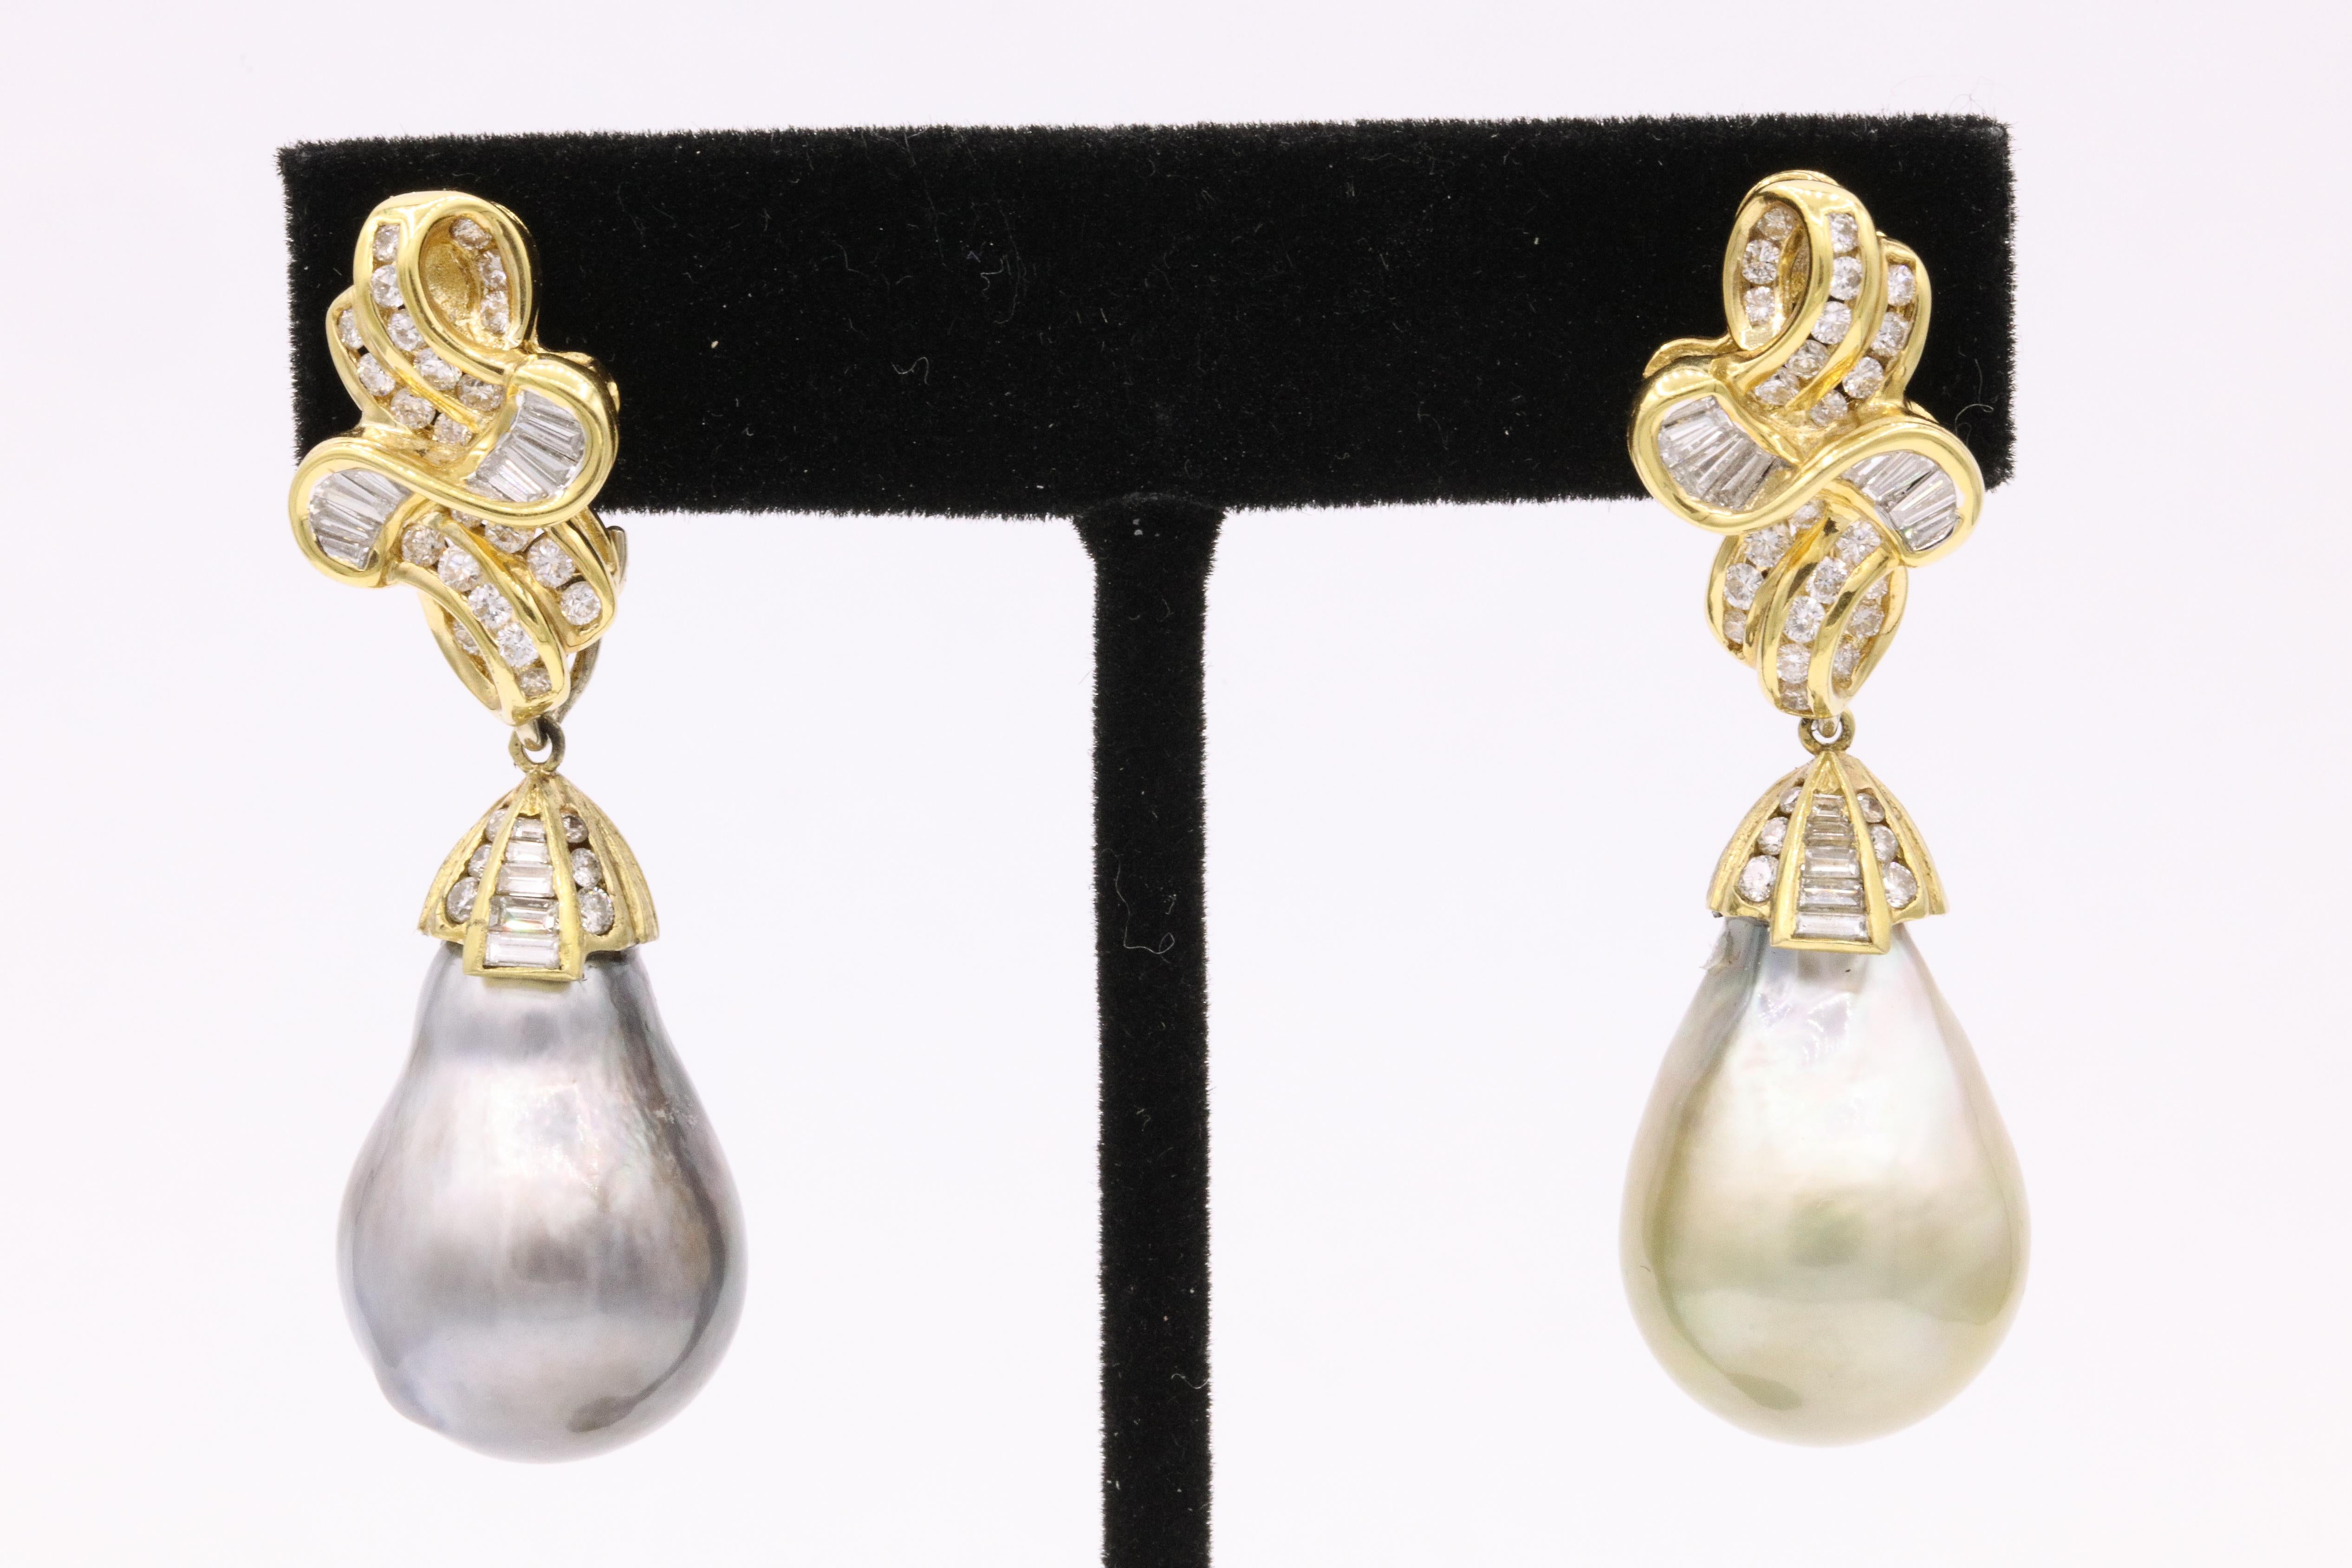 18K Yellow gold earring featuring two Tahitian pearls, gun blue and pistachio color, with round brilliant and baguettes weighing approximately 4.50 carats. 
Pearl bottoms can be taken off by hook in the back. 